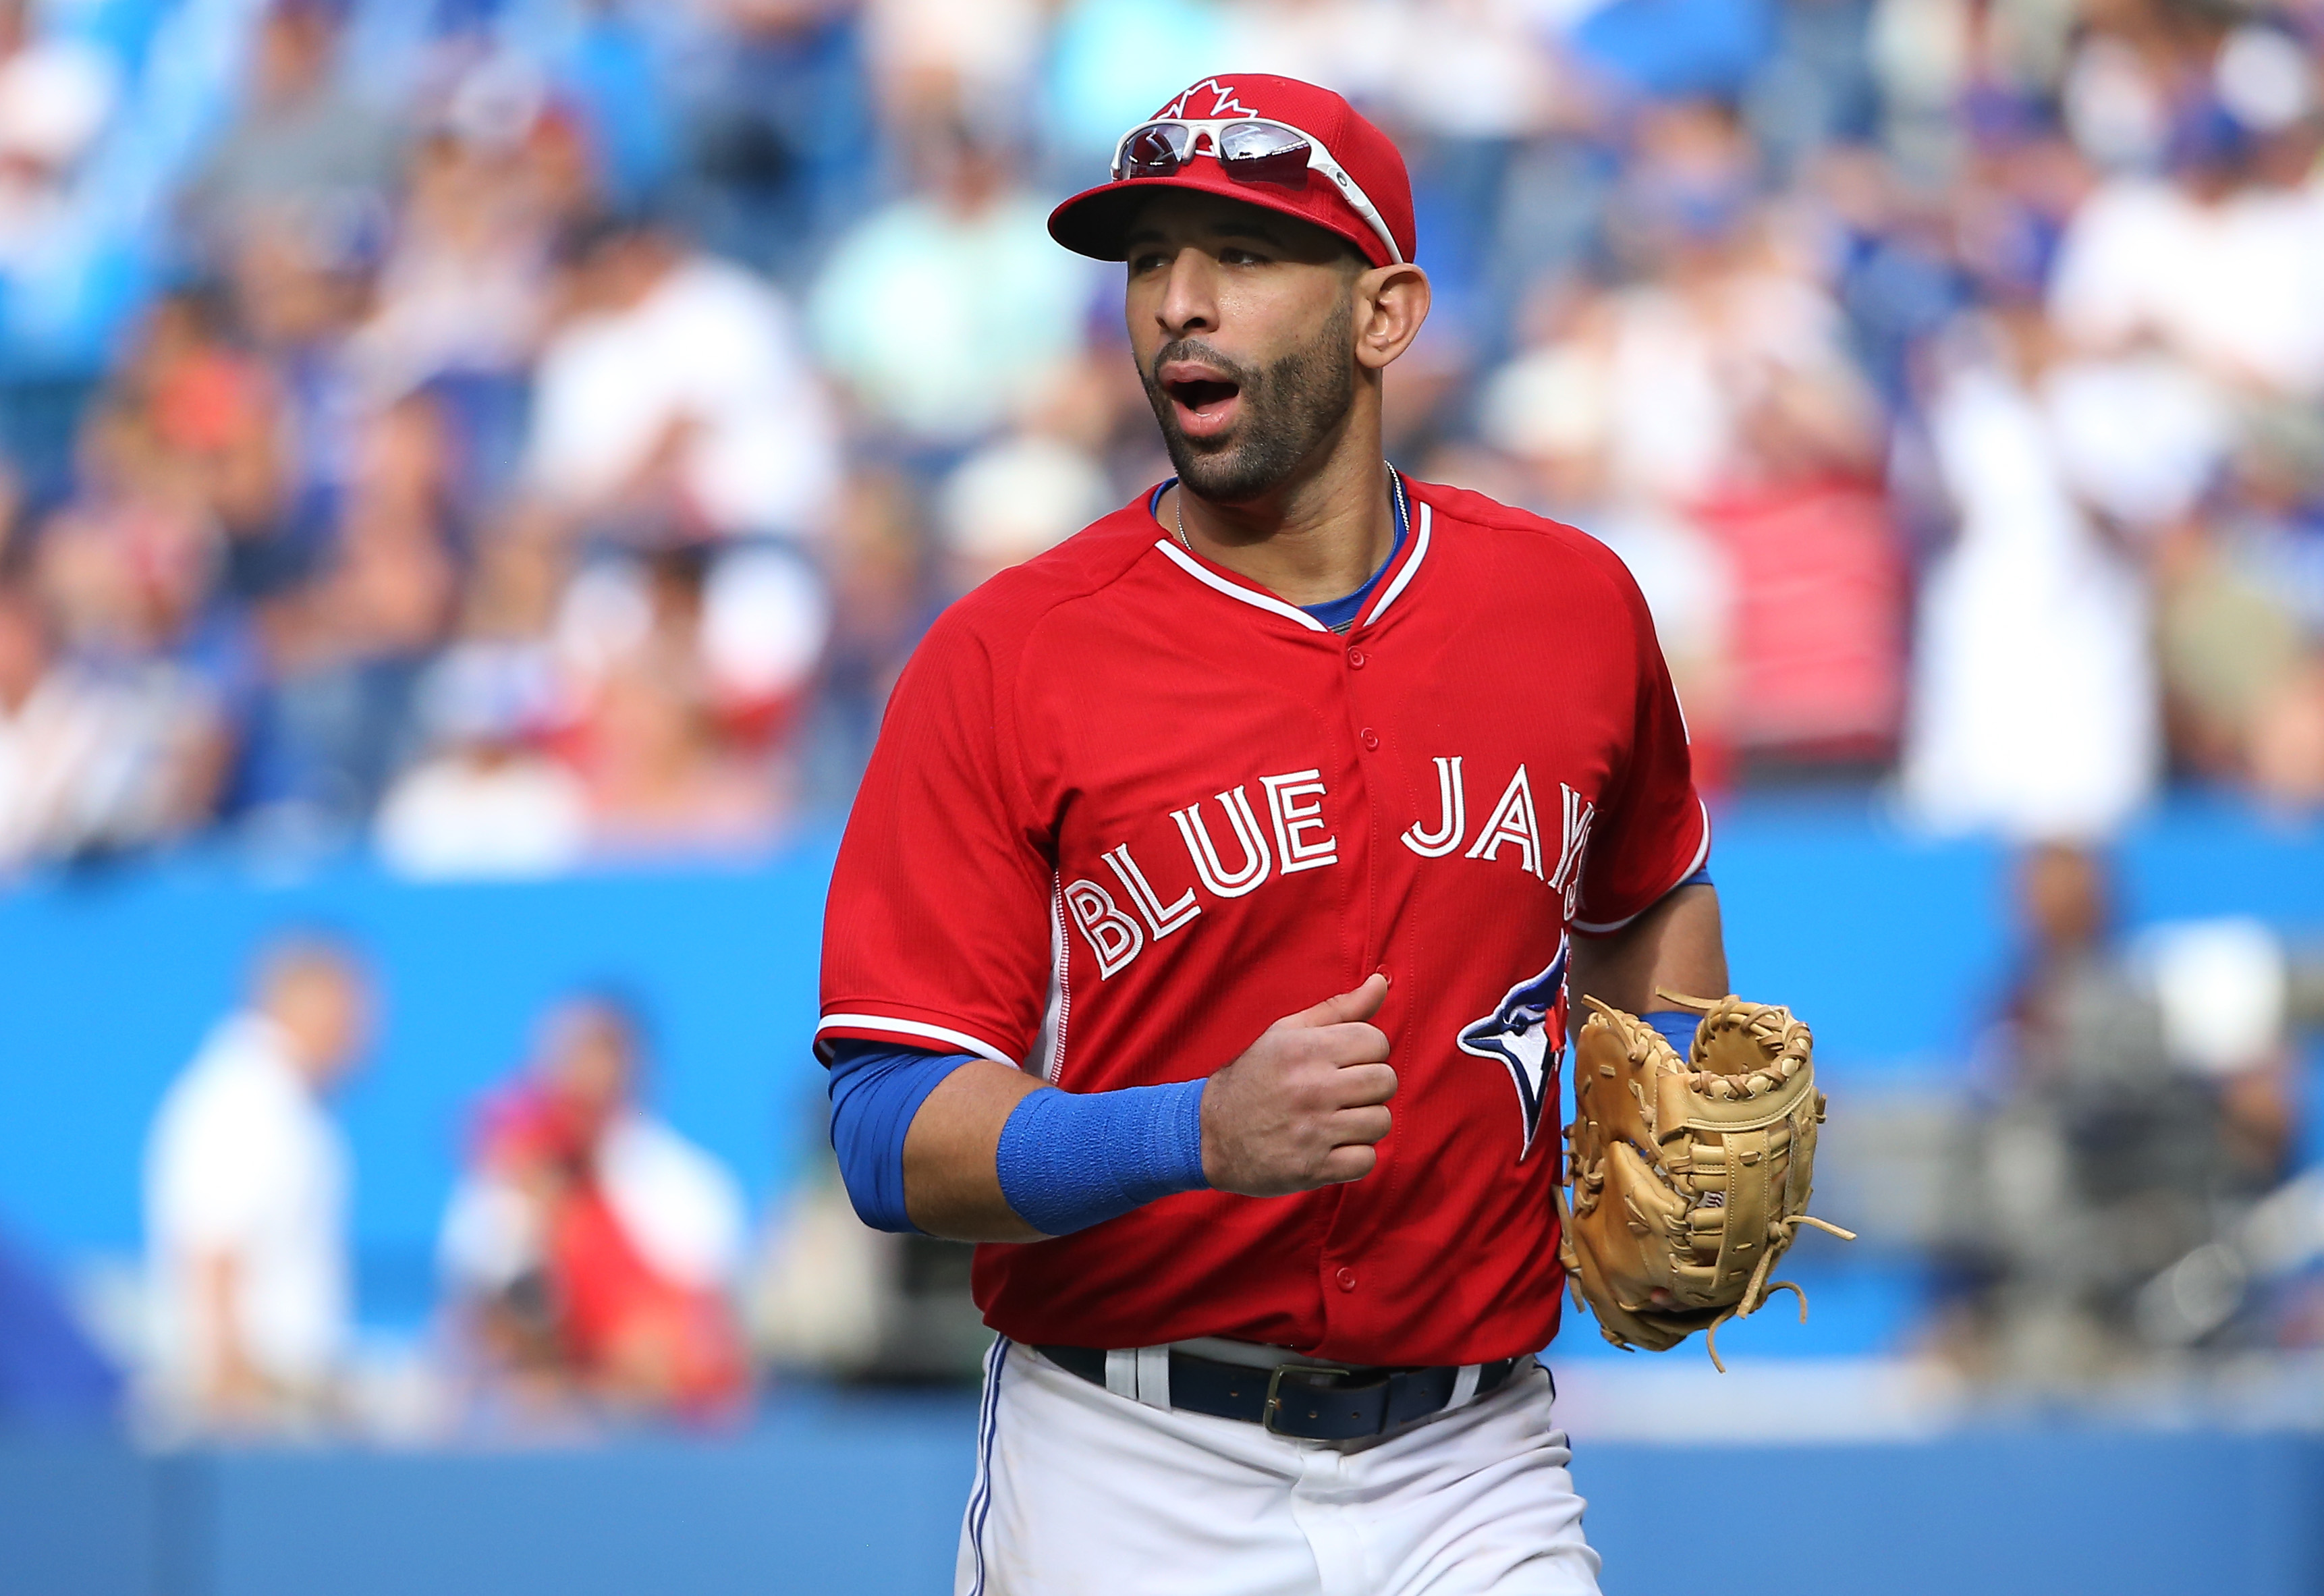 Jose Bautista of the Toronto Blue Jays wears the new red jersey worn  News Photo - Getty Images